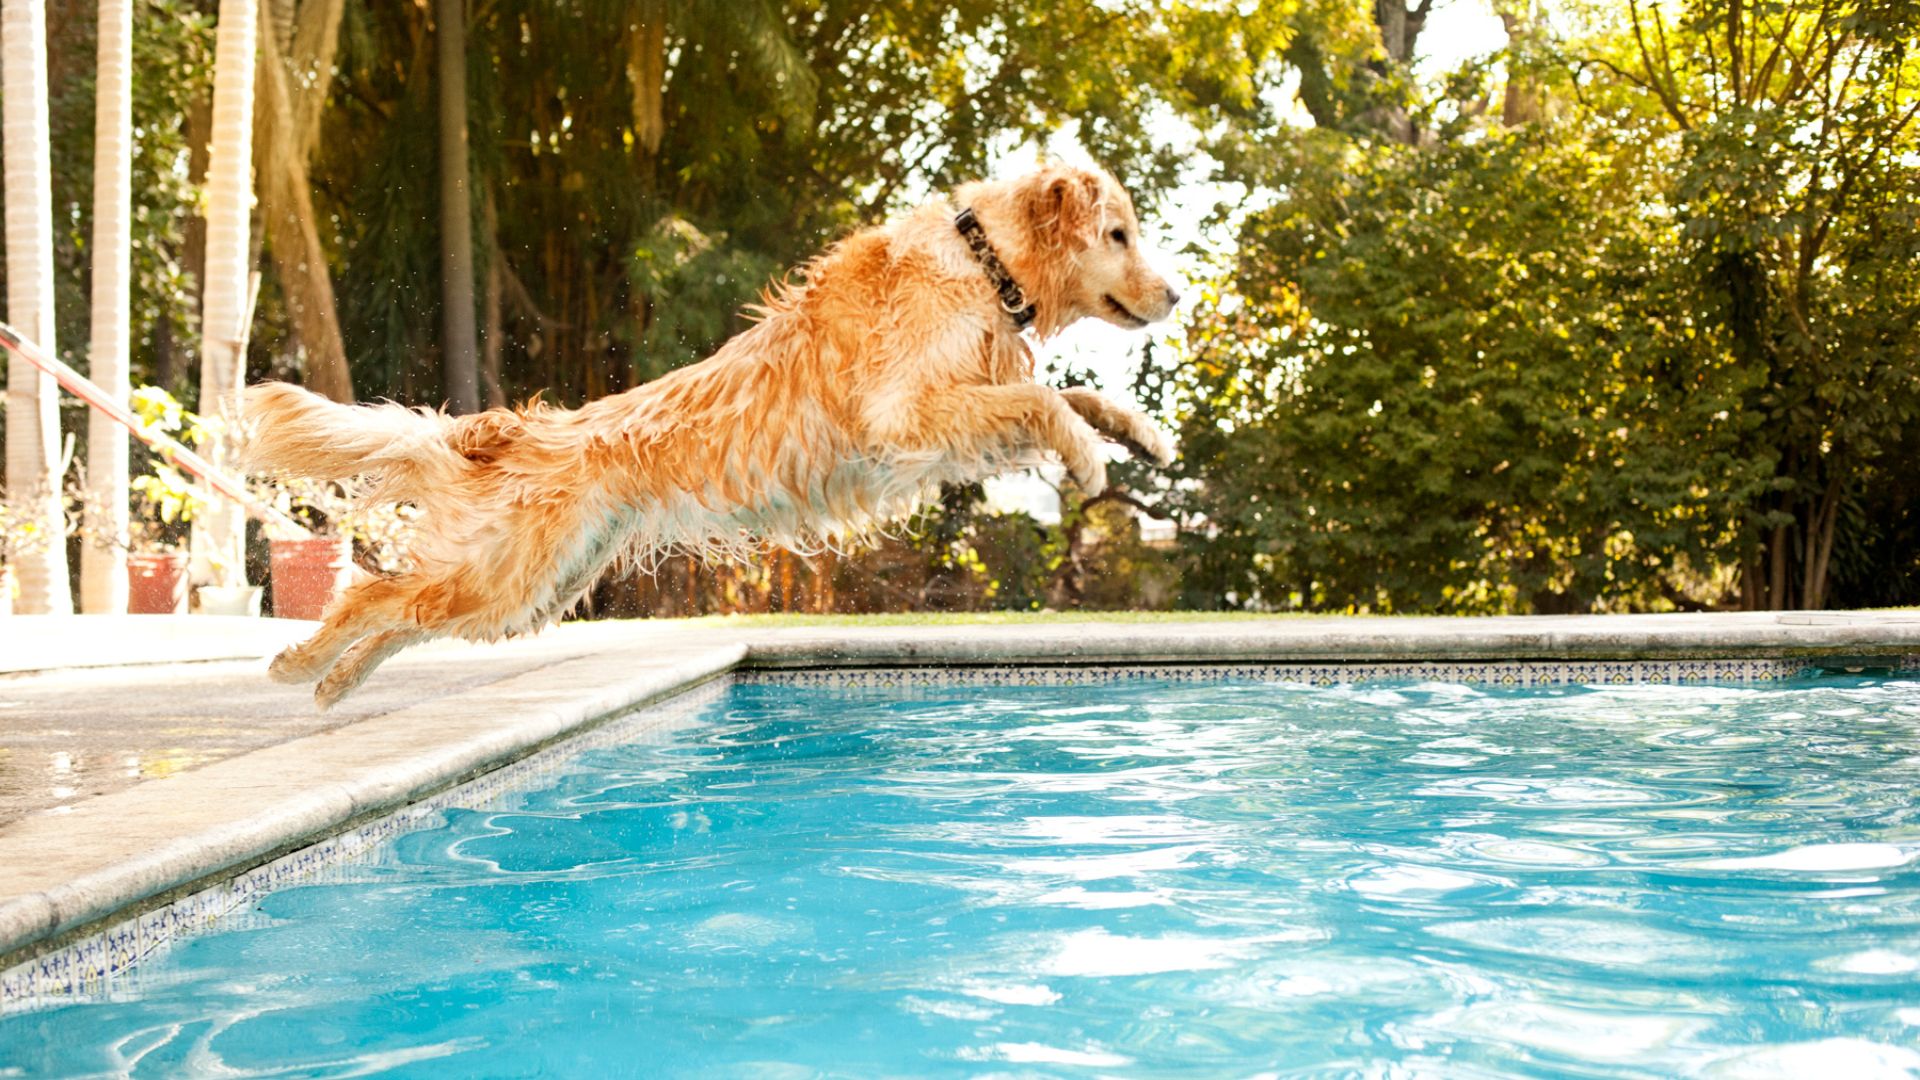 Leap Year: A golden retriever dog mid air as it leaps into an outdoor swimming pool.